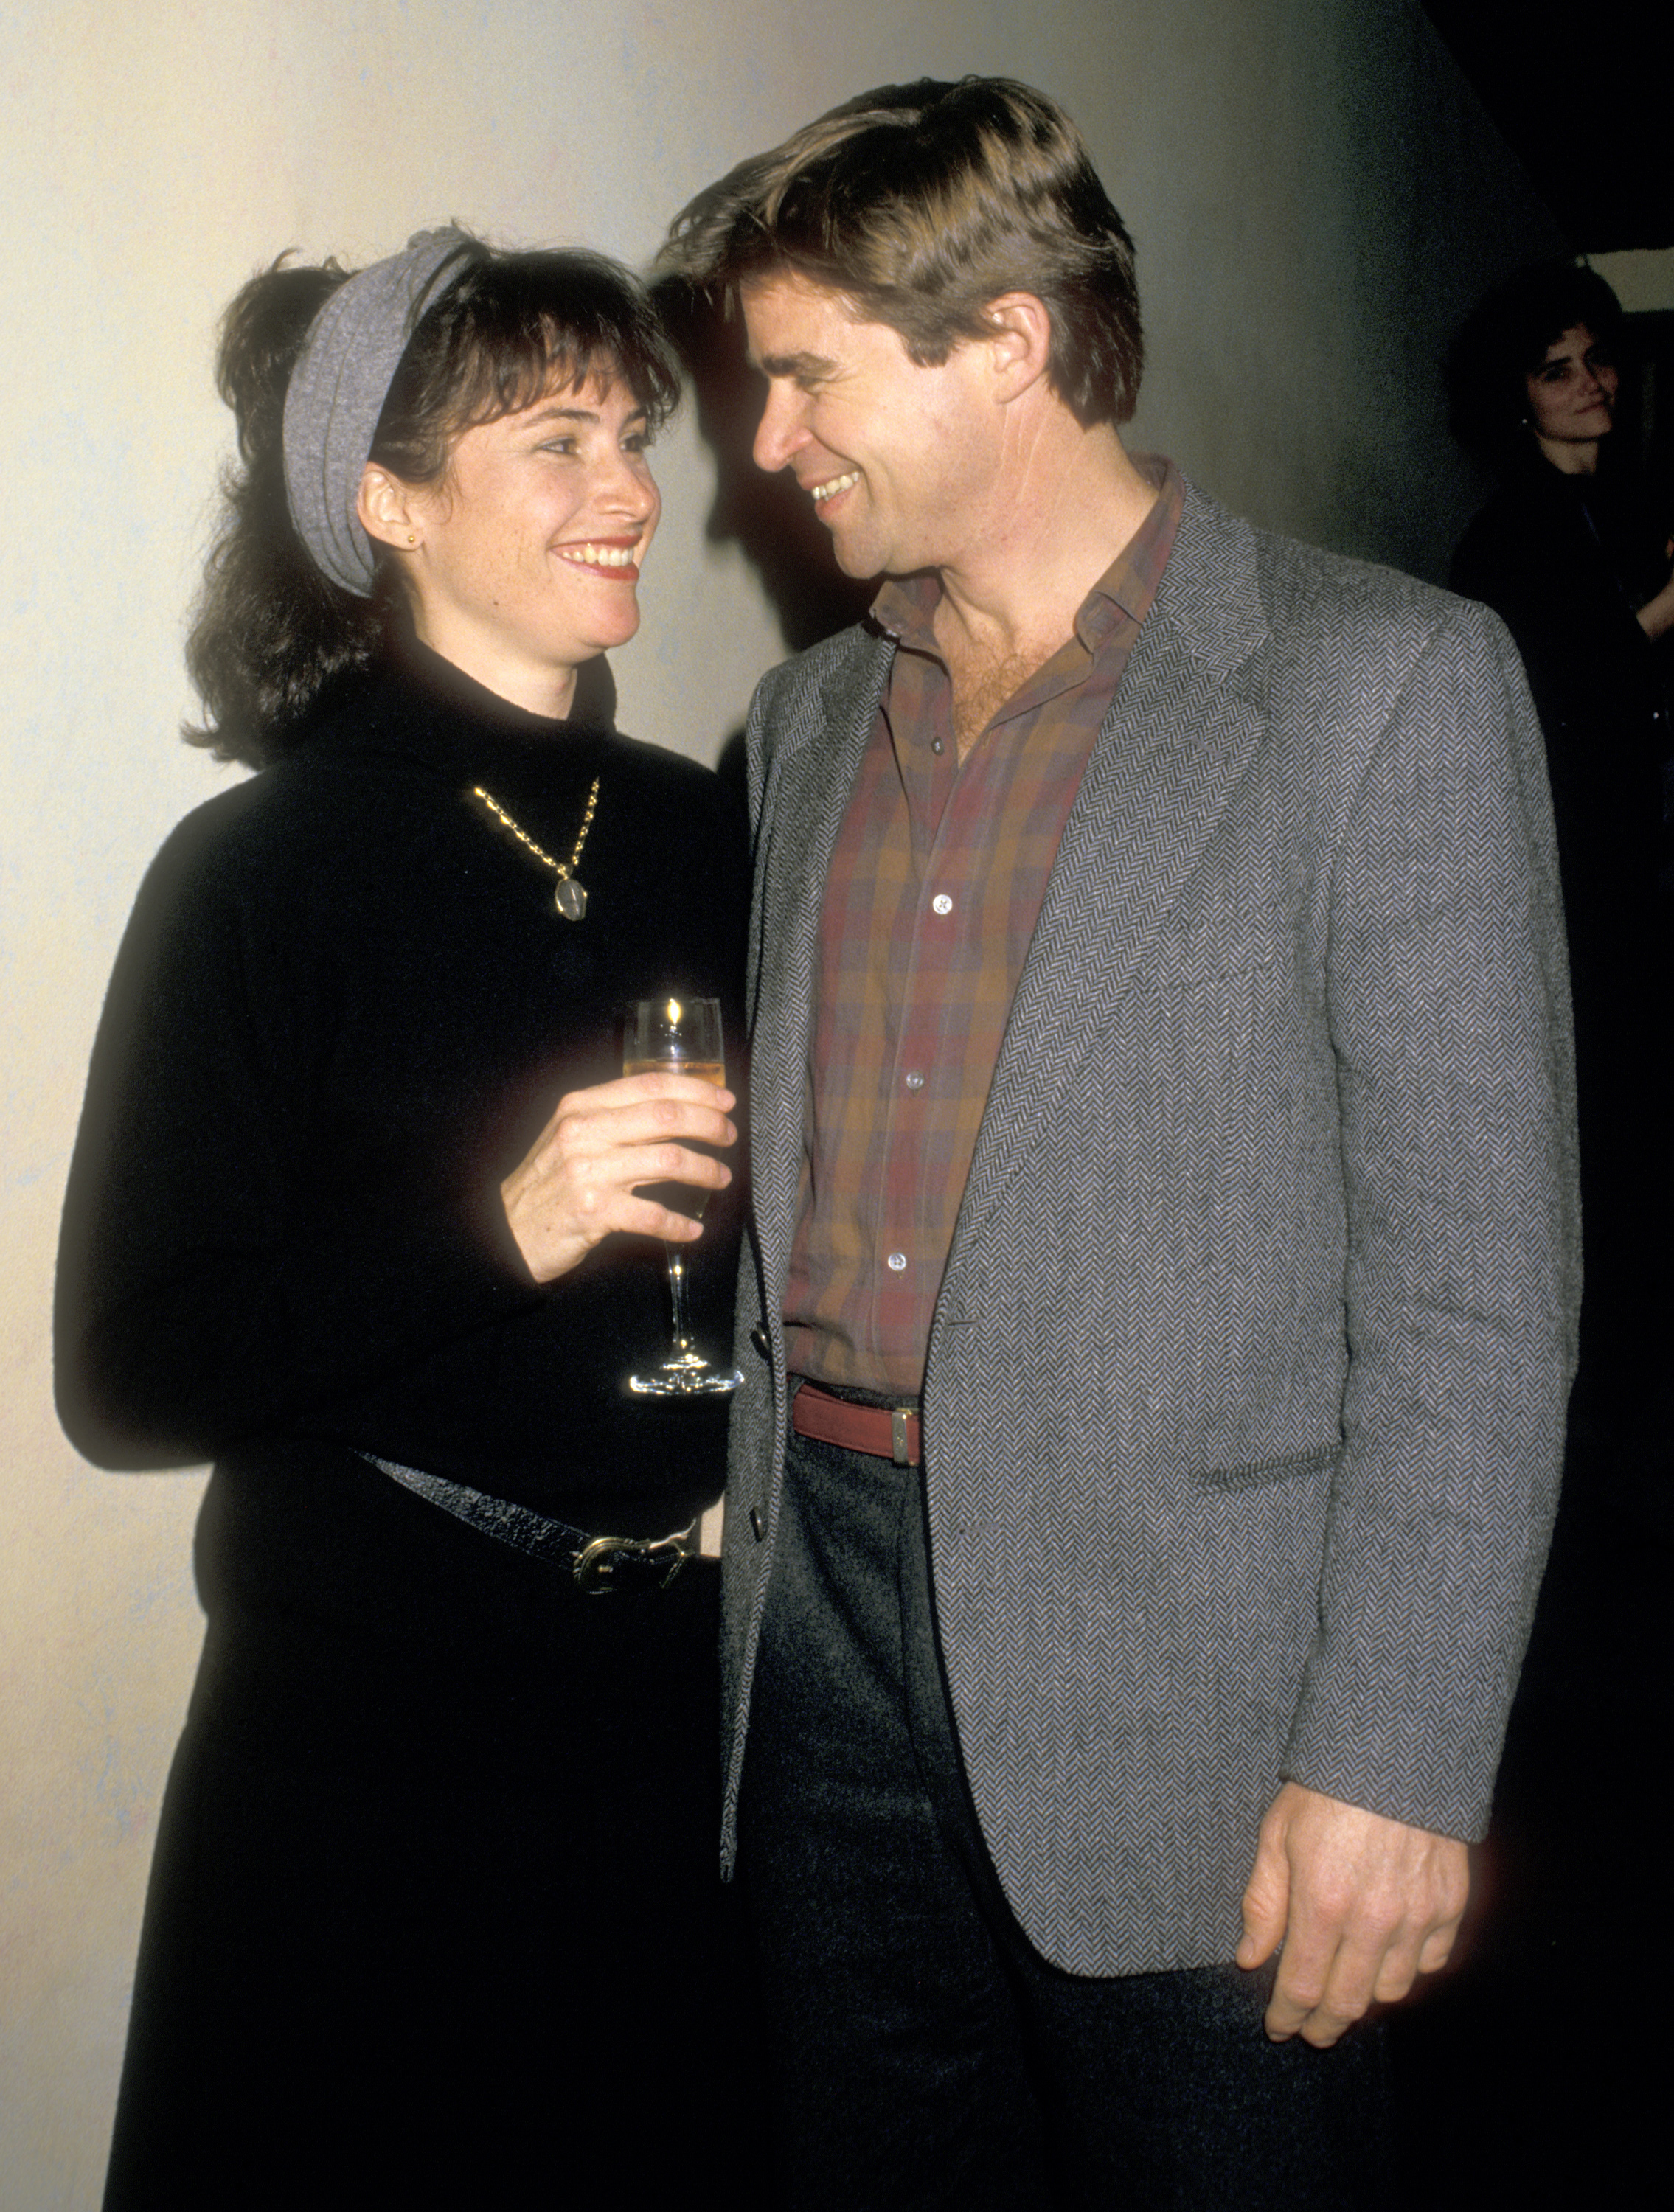 Pam Van Sant and Treat Williams in New York City on February 3, 1988 | Source: Getty Images